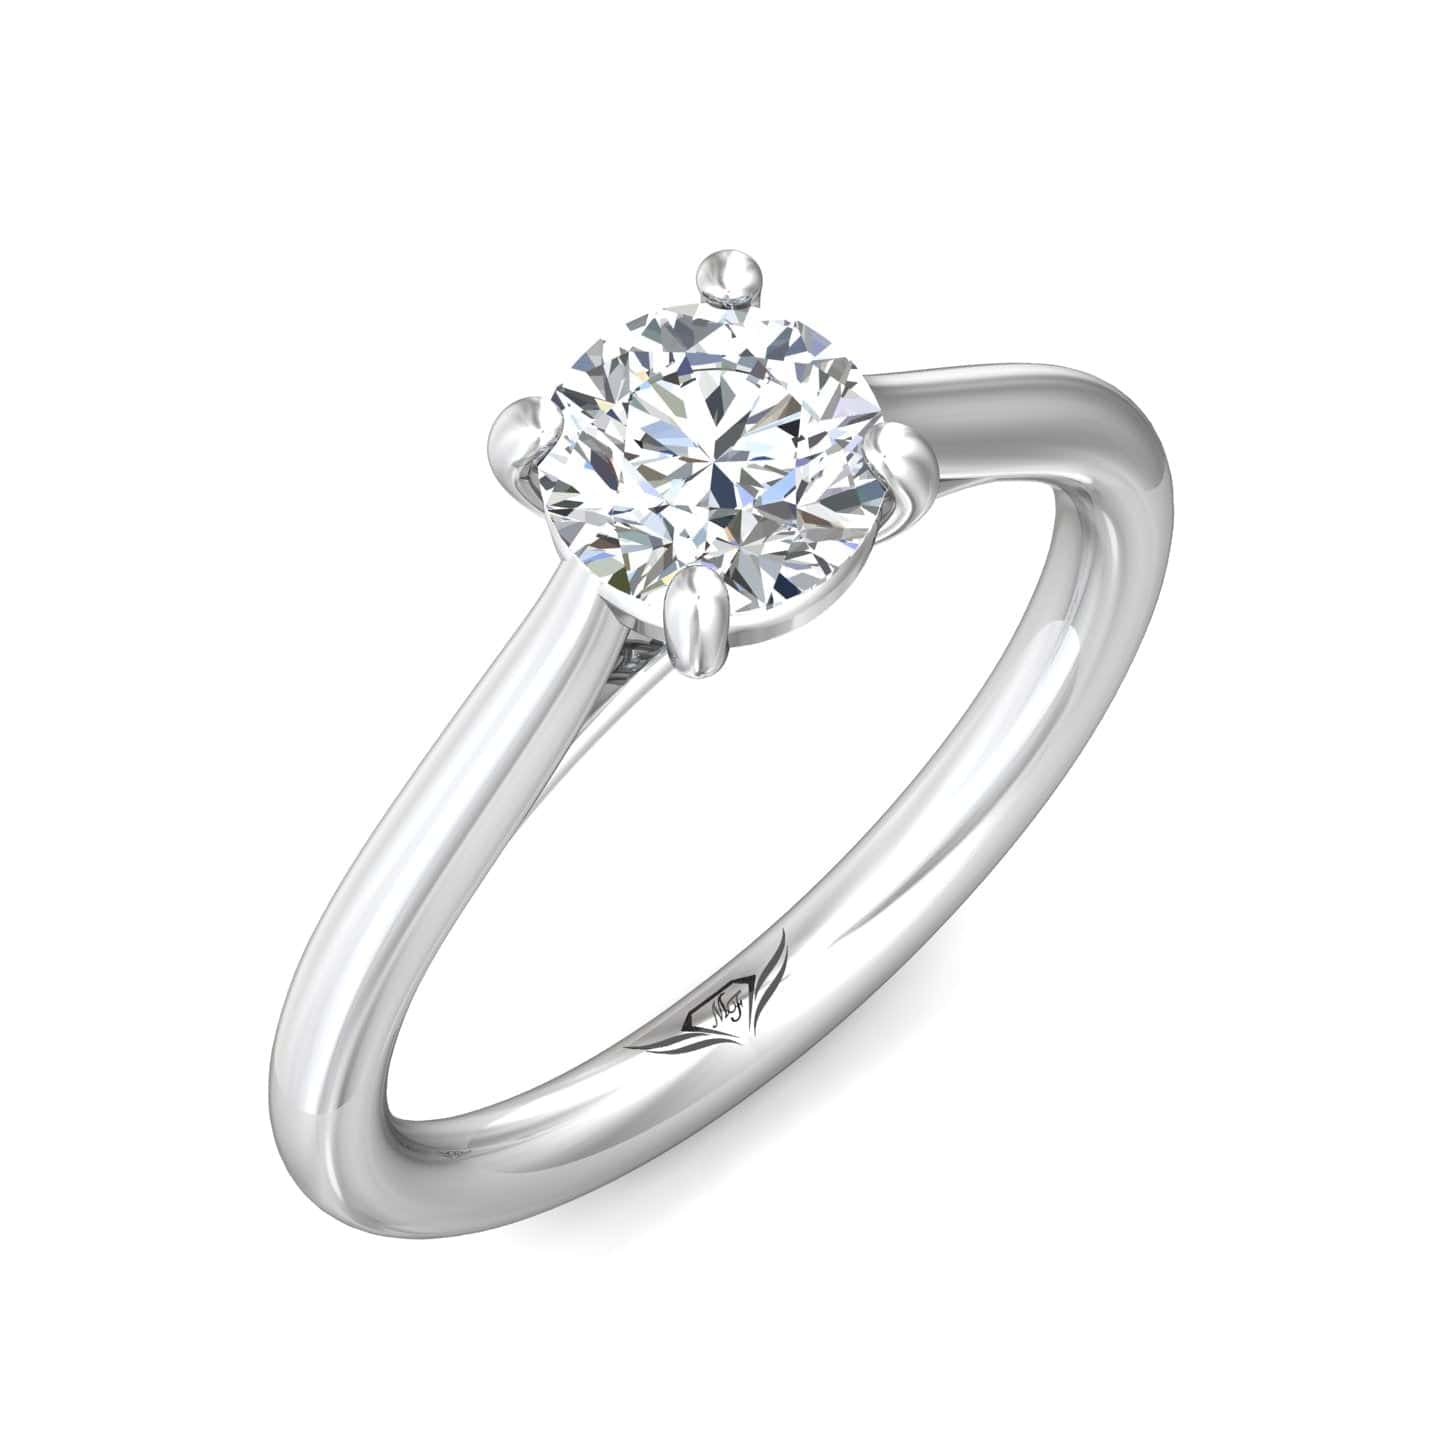 Platinum 4 Prong Cathedral Engagement Ring Setting